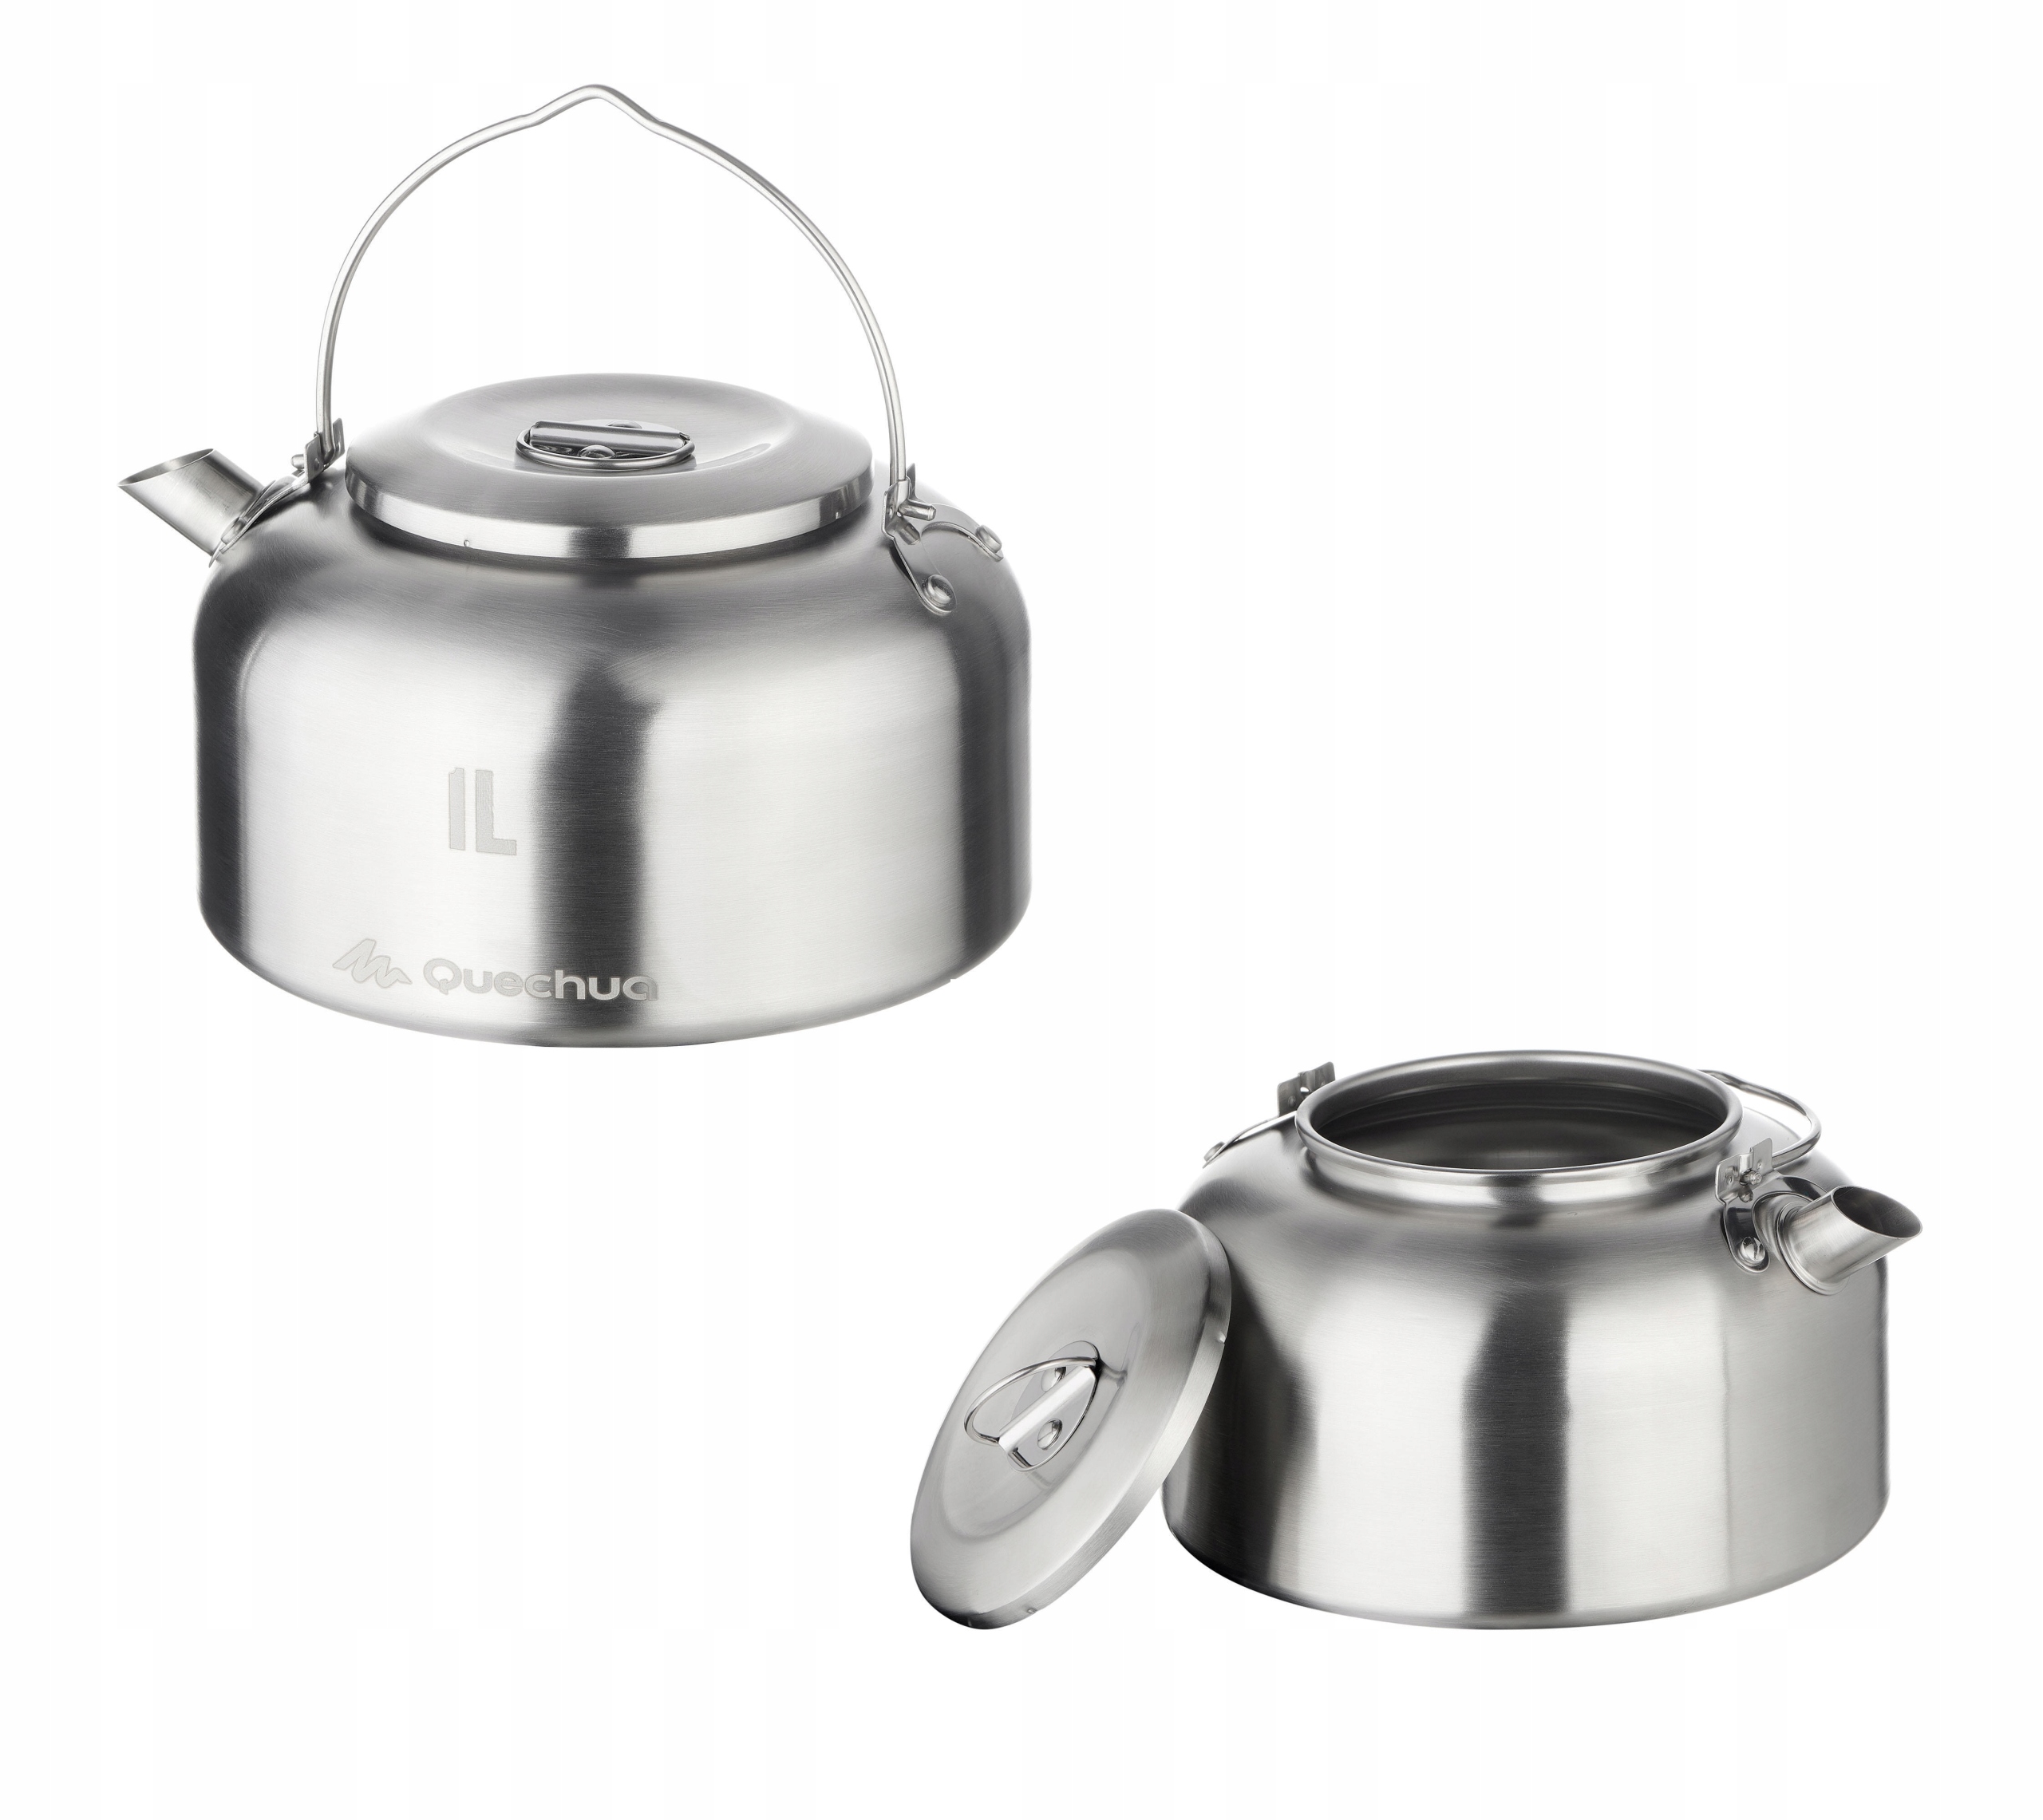 Quechua MH500 1 L Stainless Steel Camping Kettle